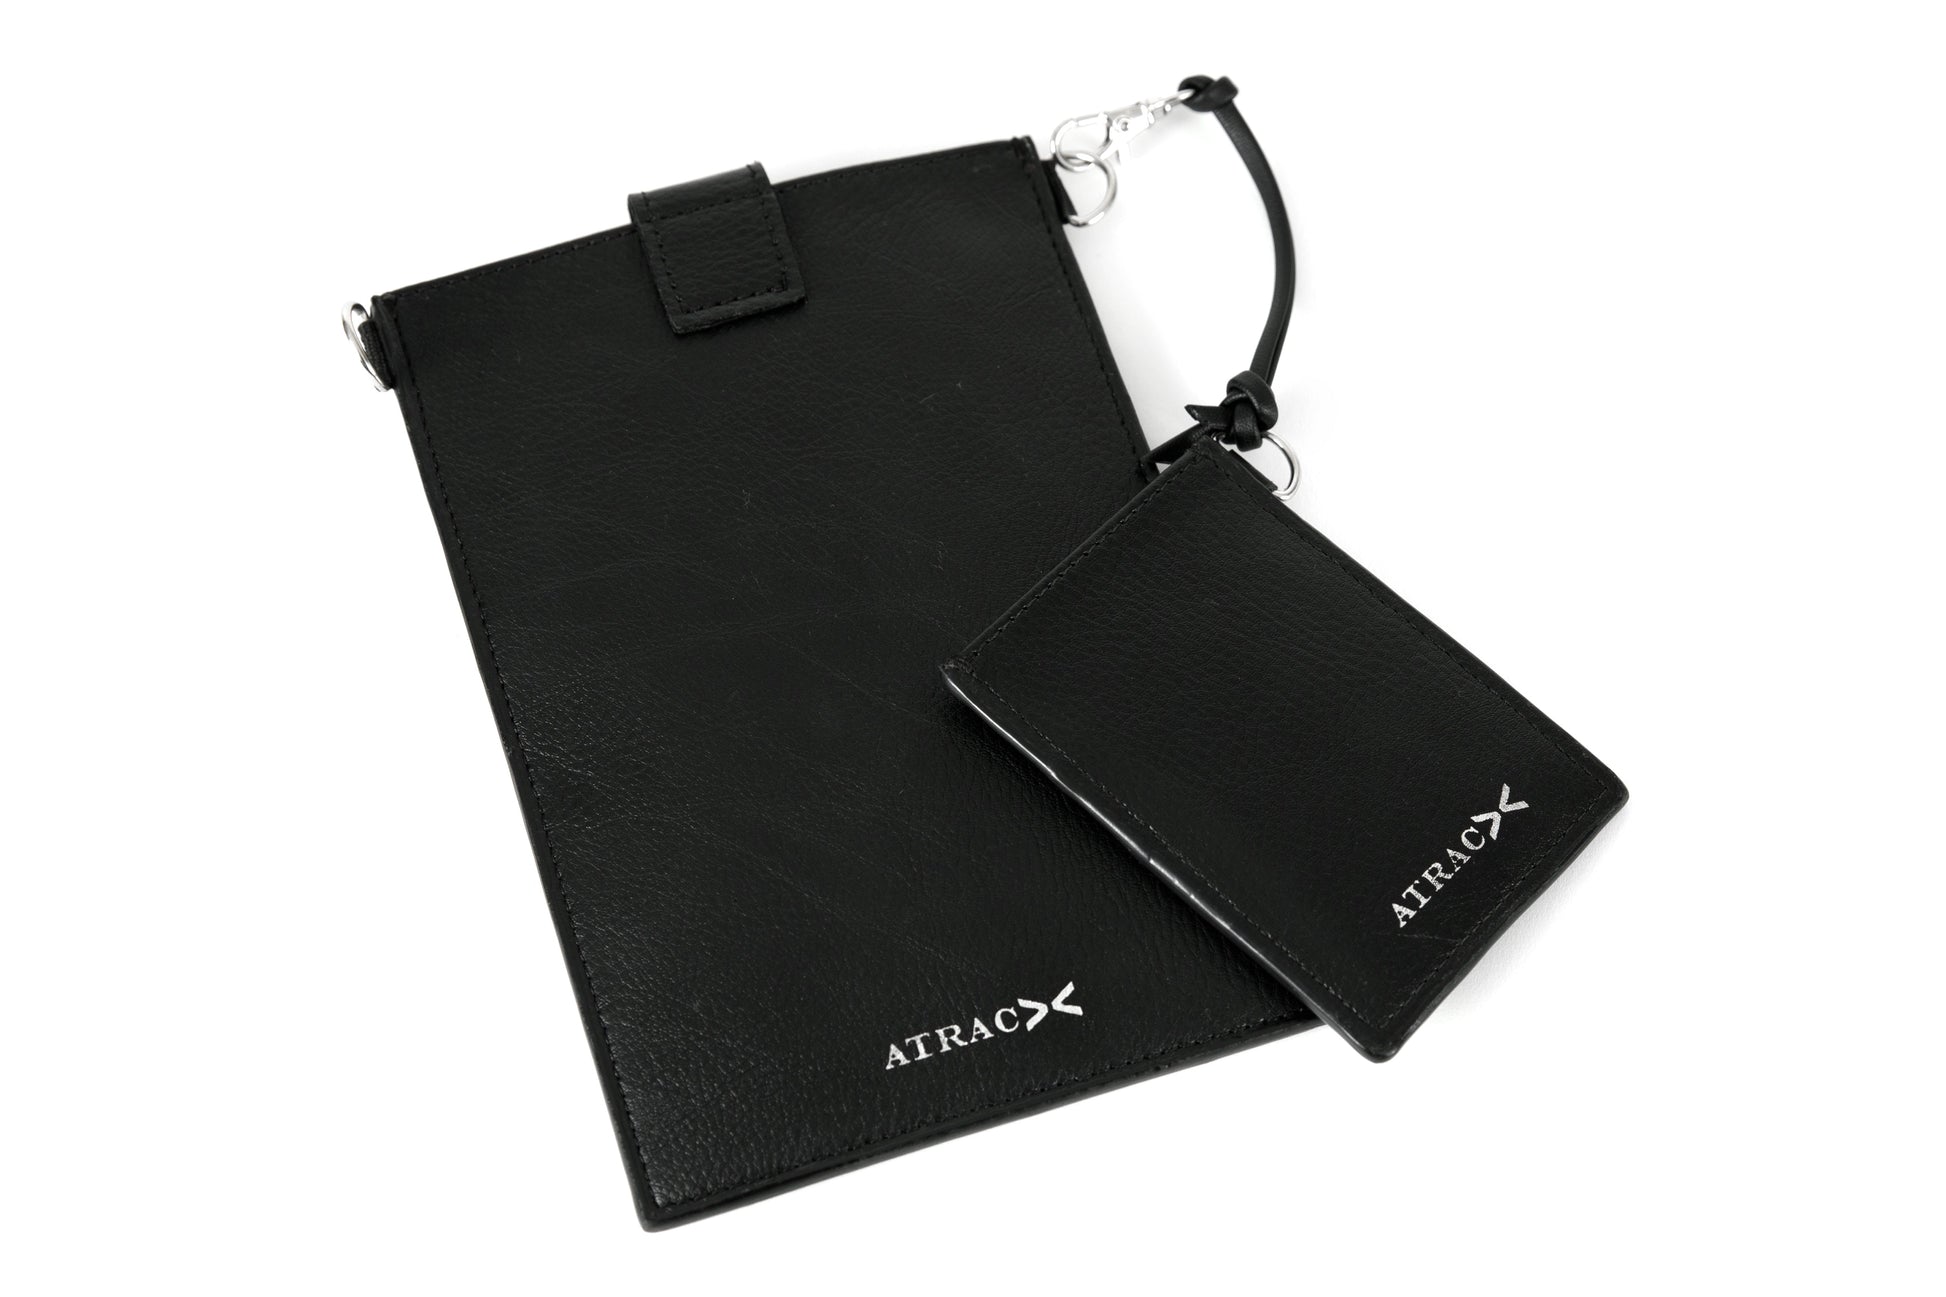 Belt Clip / Clasp - The Hook - Black - Upgrade Your Wallet / Key Cha